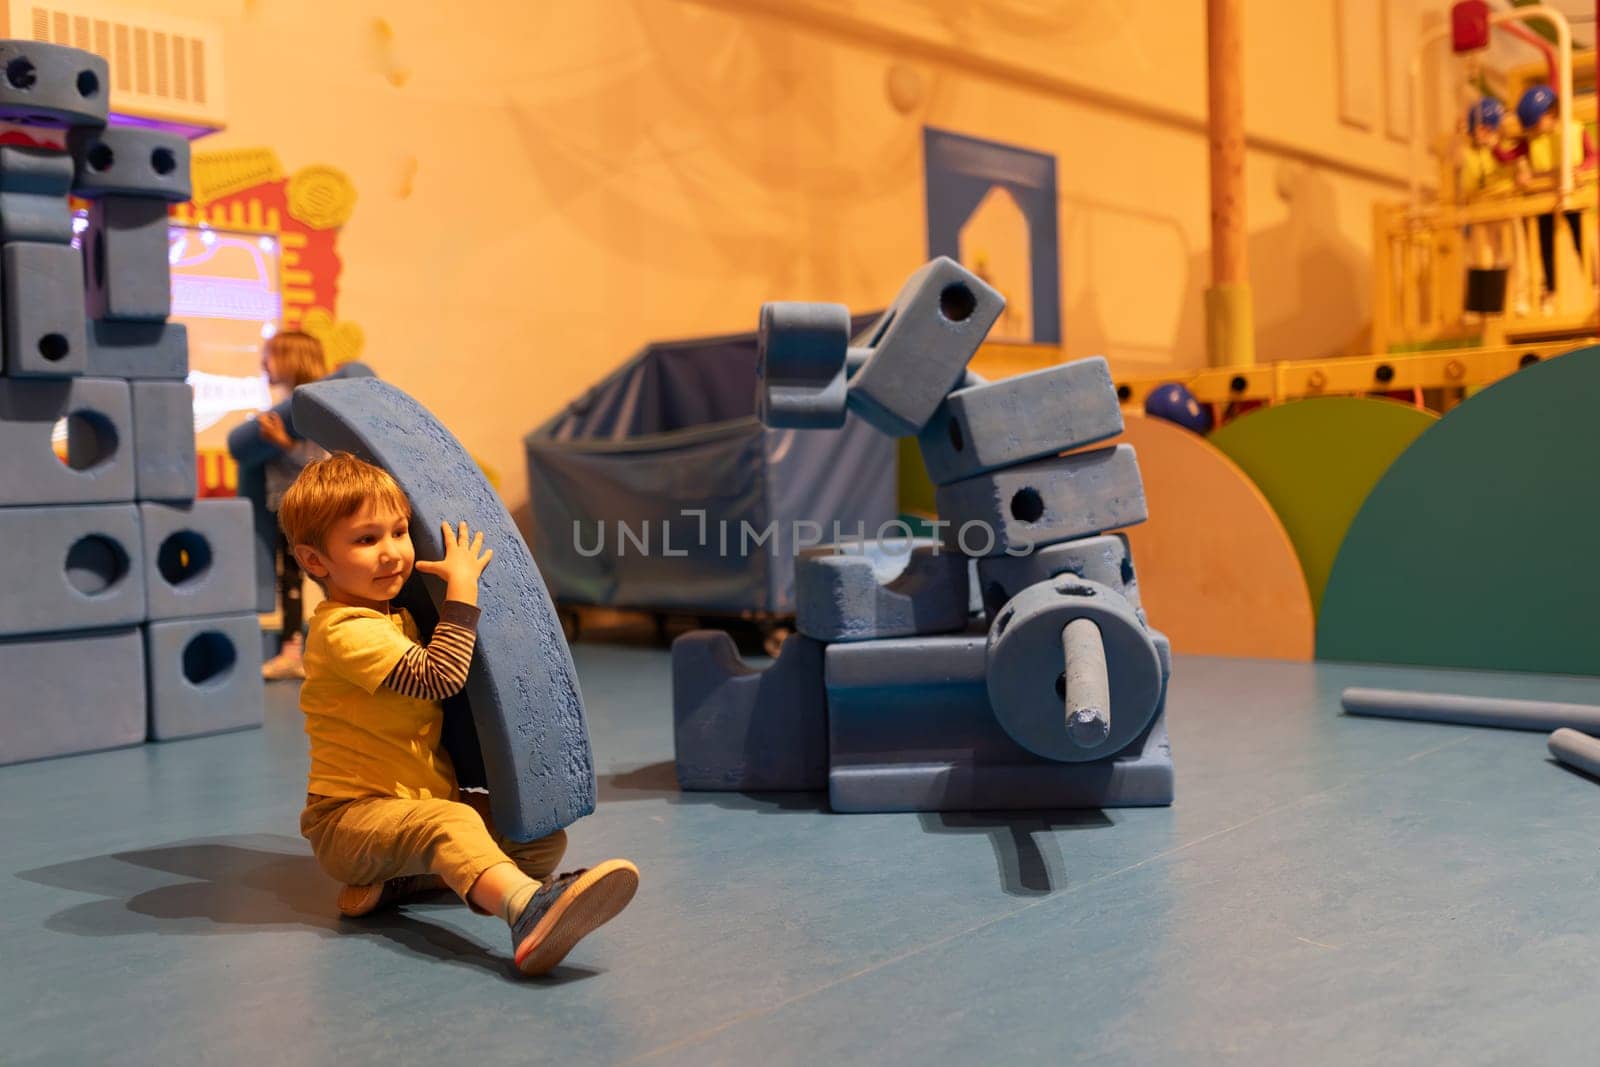 A young boy is playing with a blue toy block in a room with other toys. The boy is holding the block in his arms and he is enjoying himself. The room is filled with various toys, including a truck